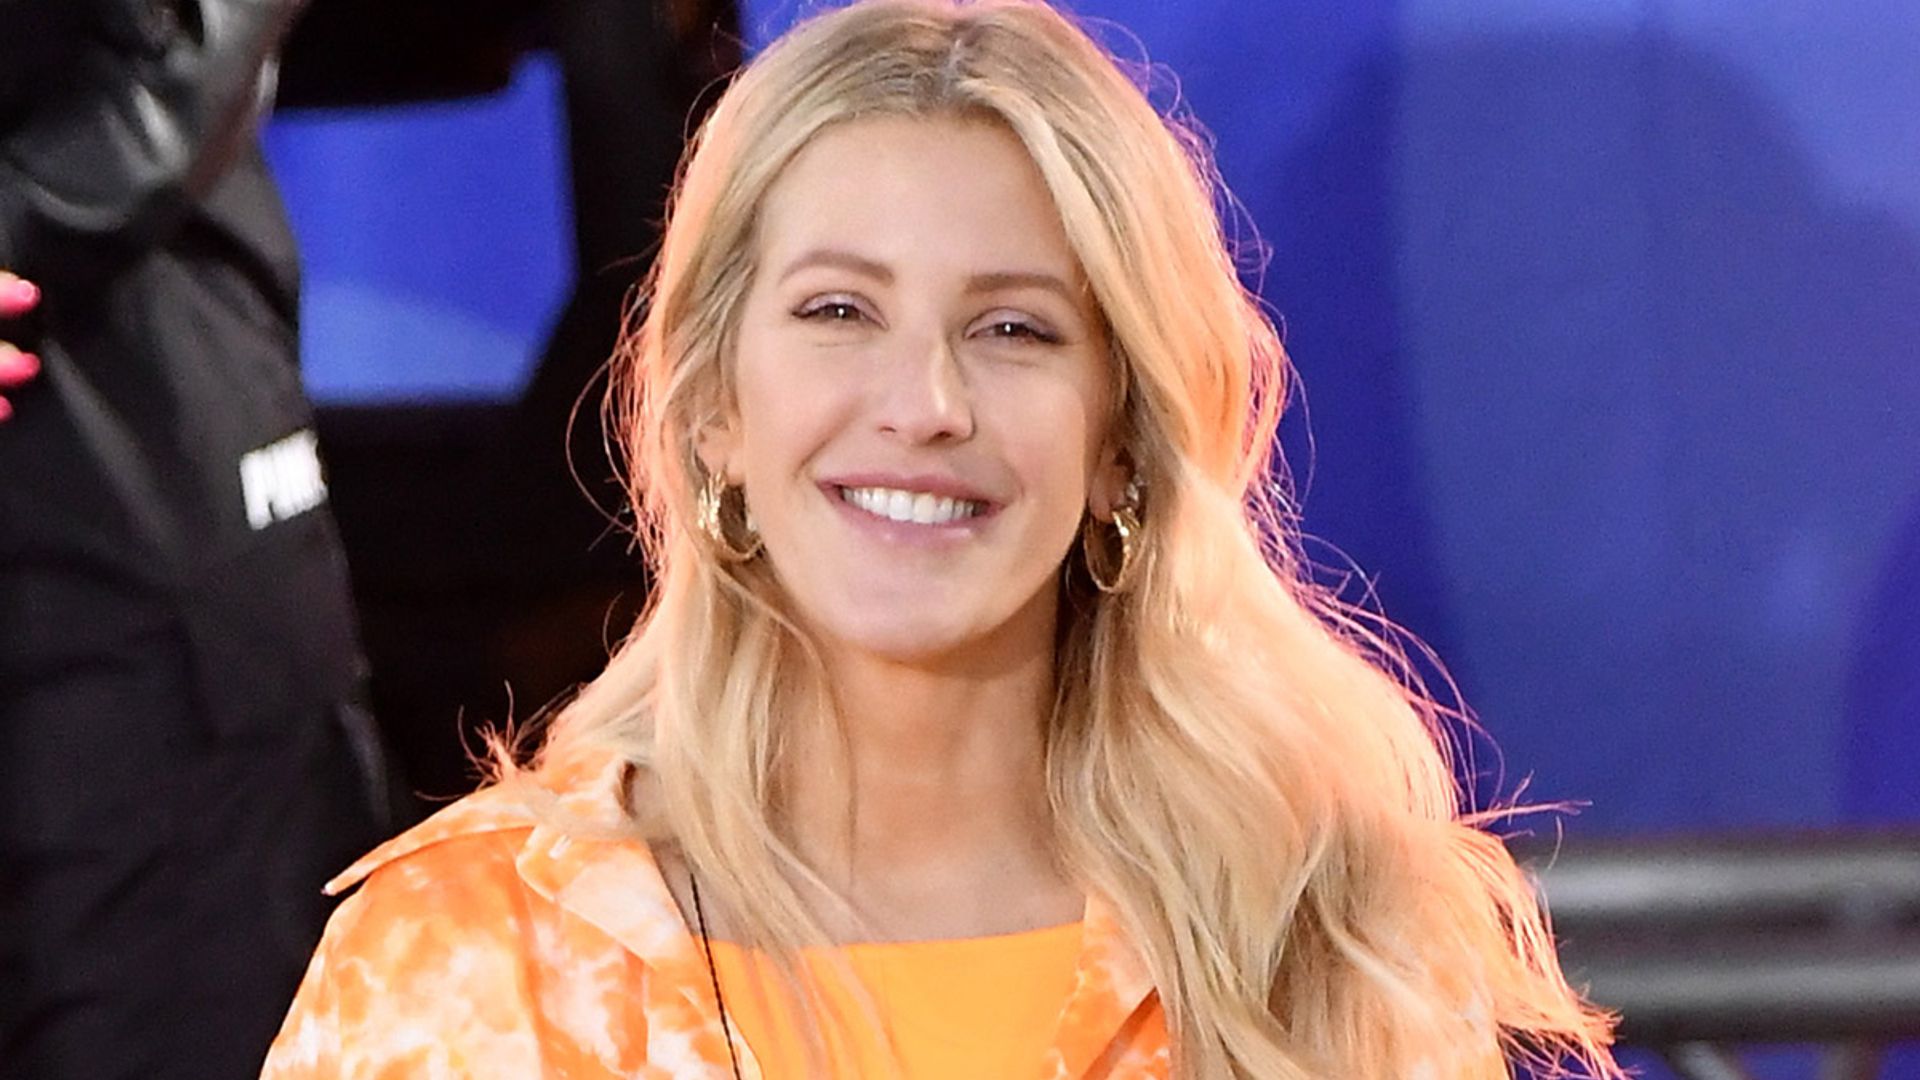 Ellie Goulding shows off her baking skills with incredible rainbow cake